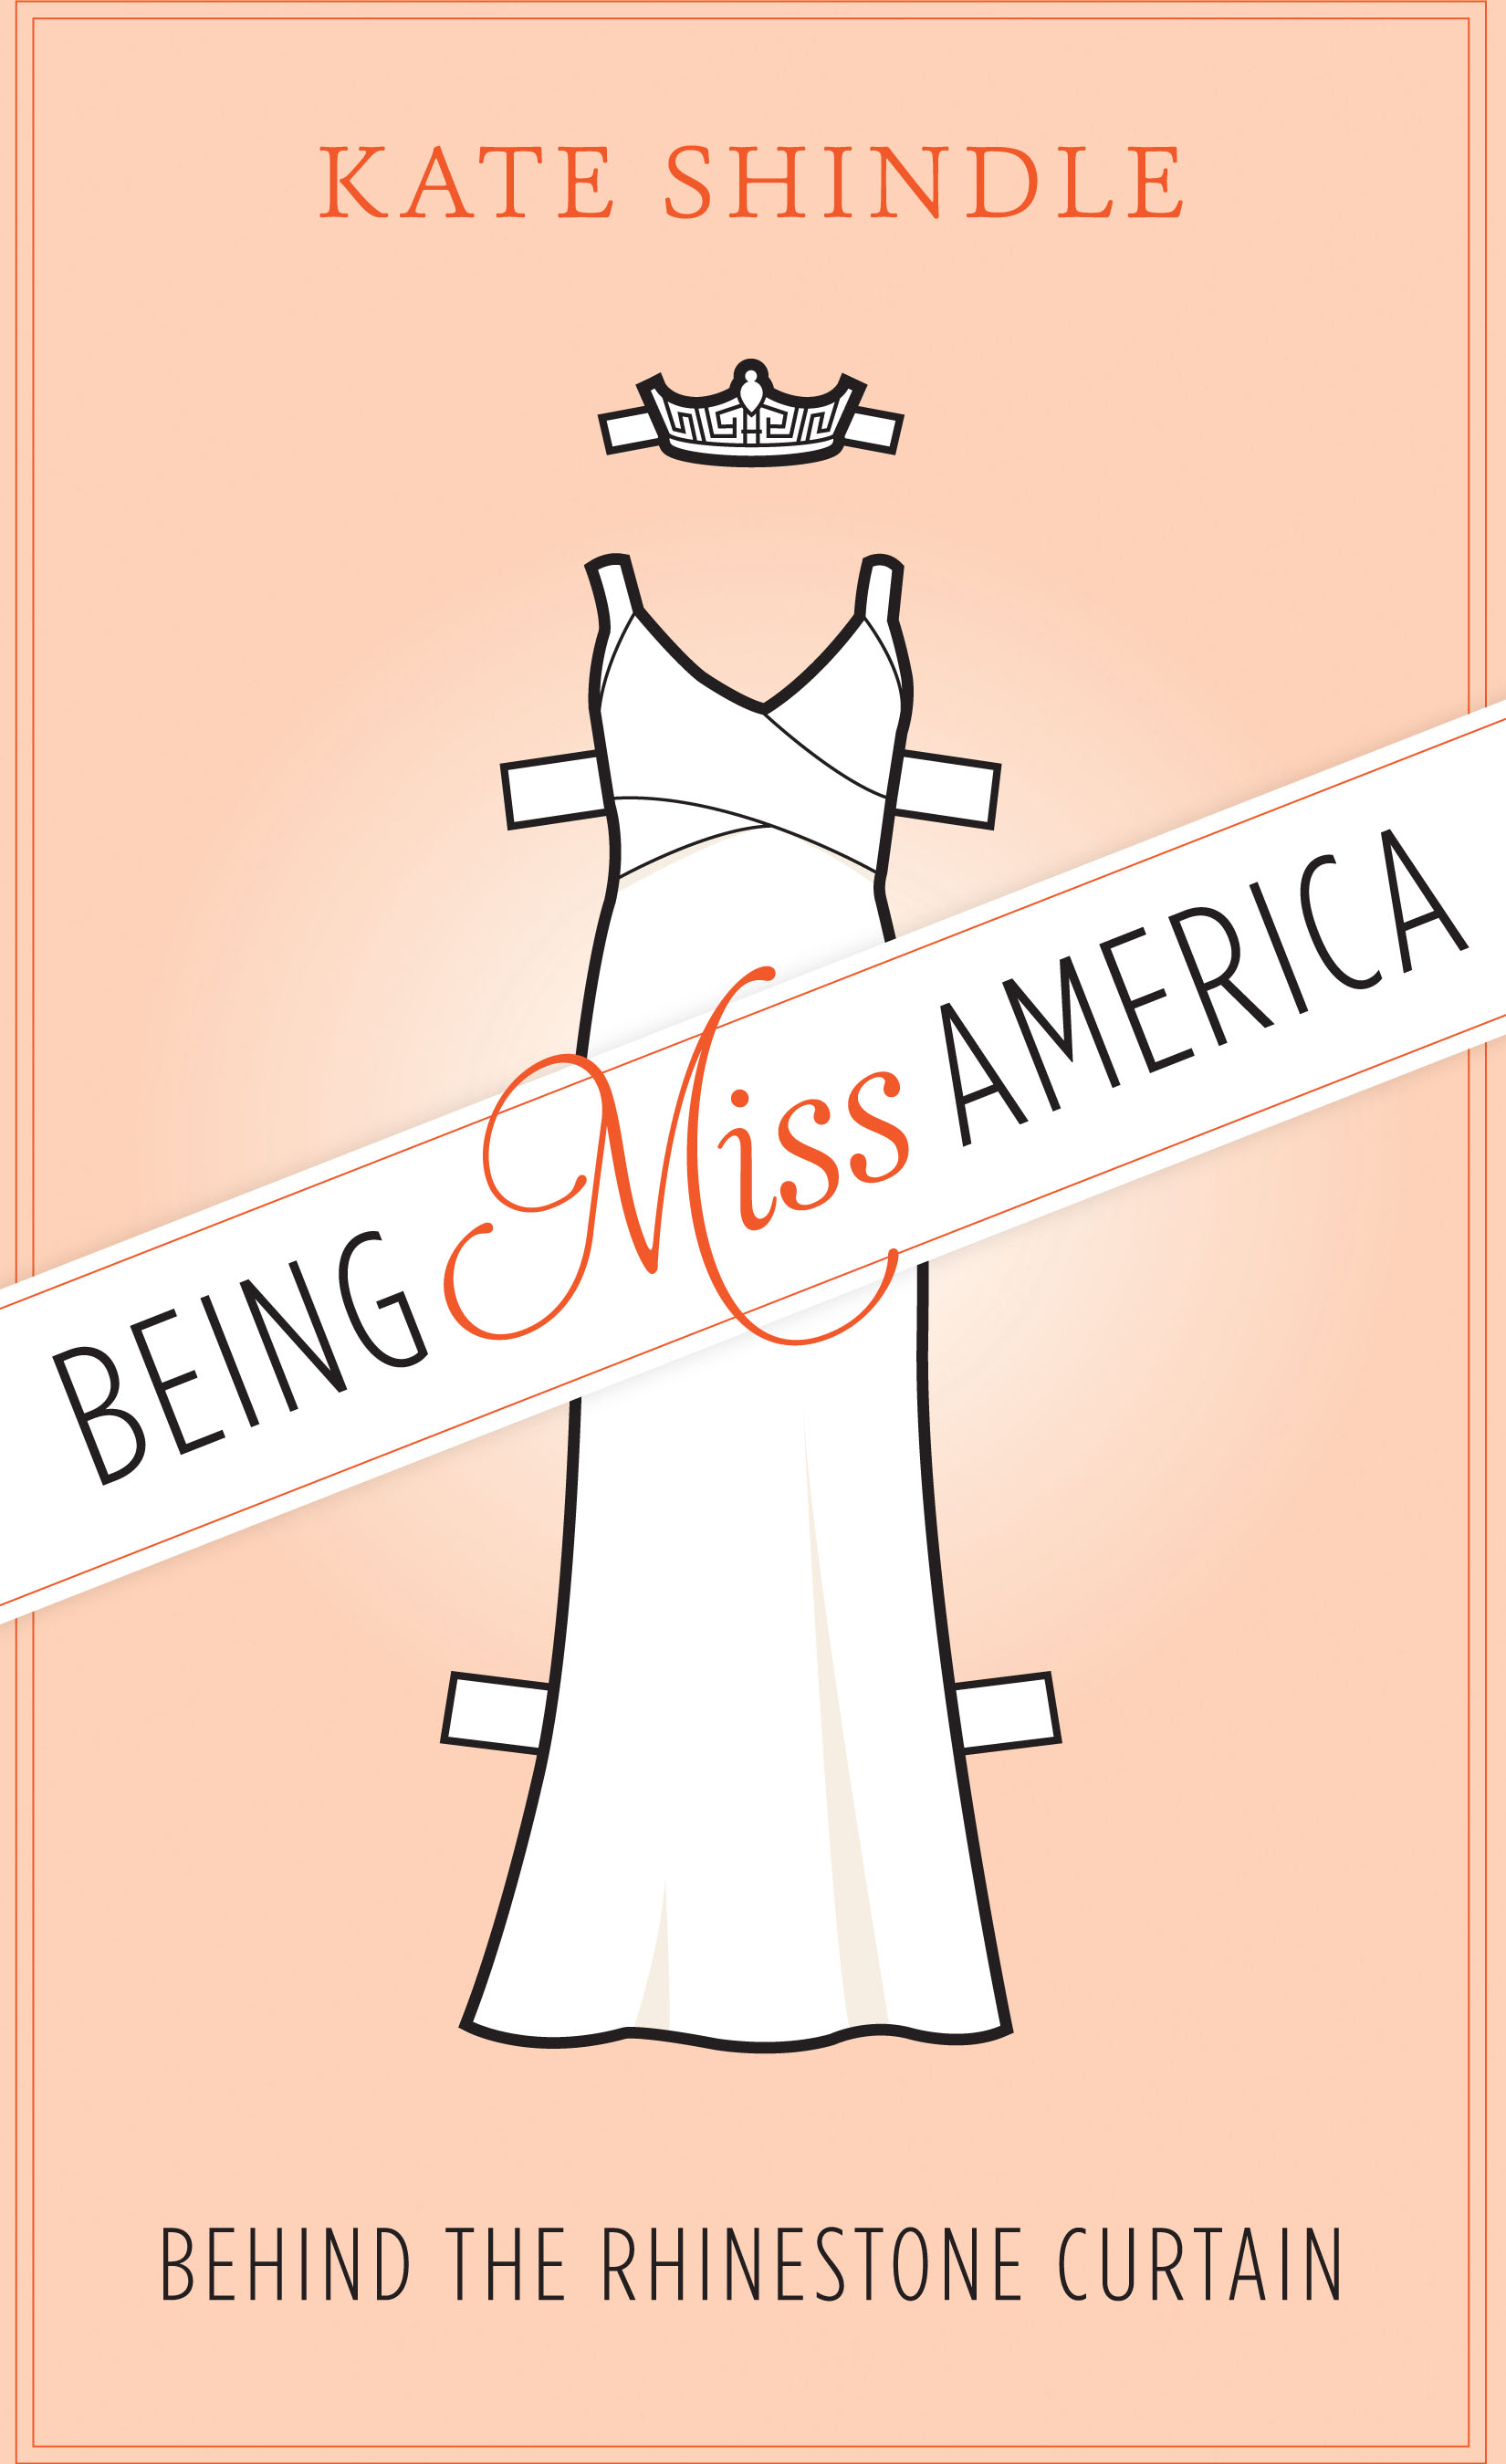 Being Miss America